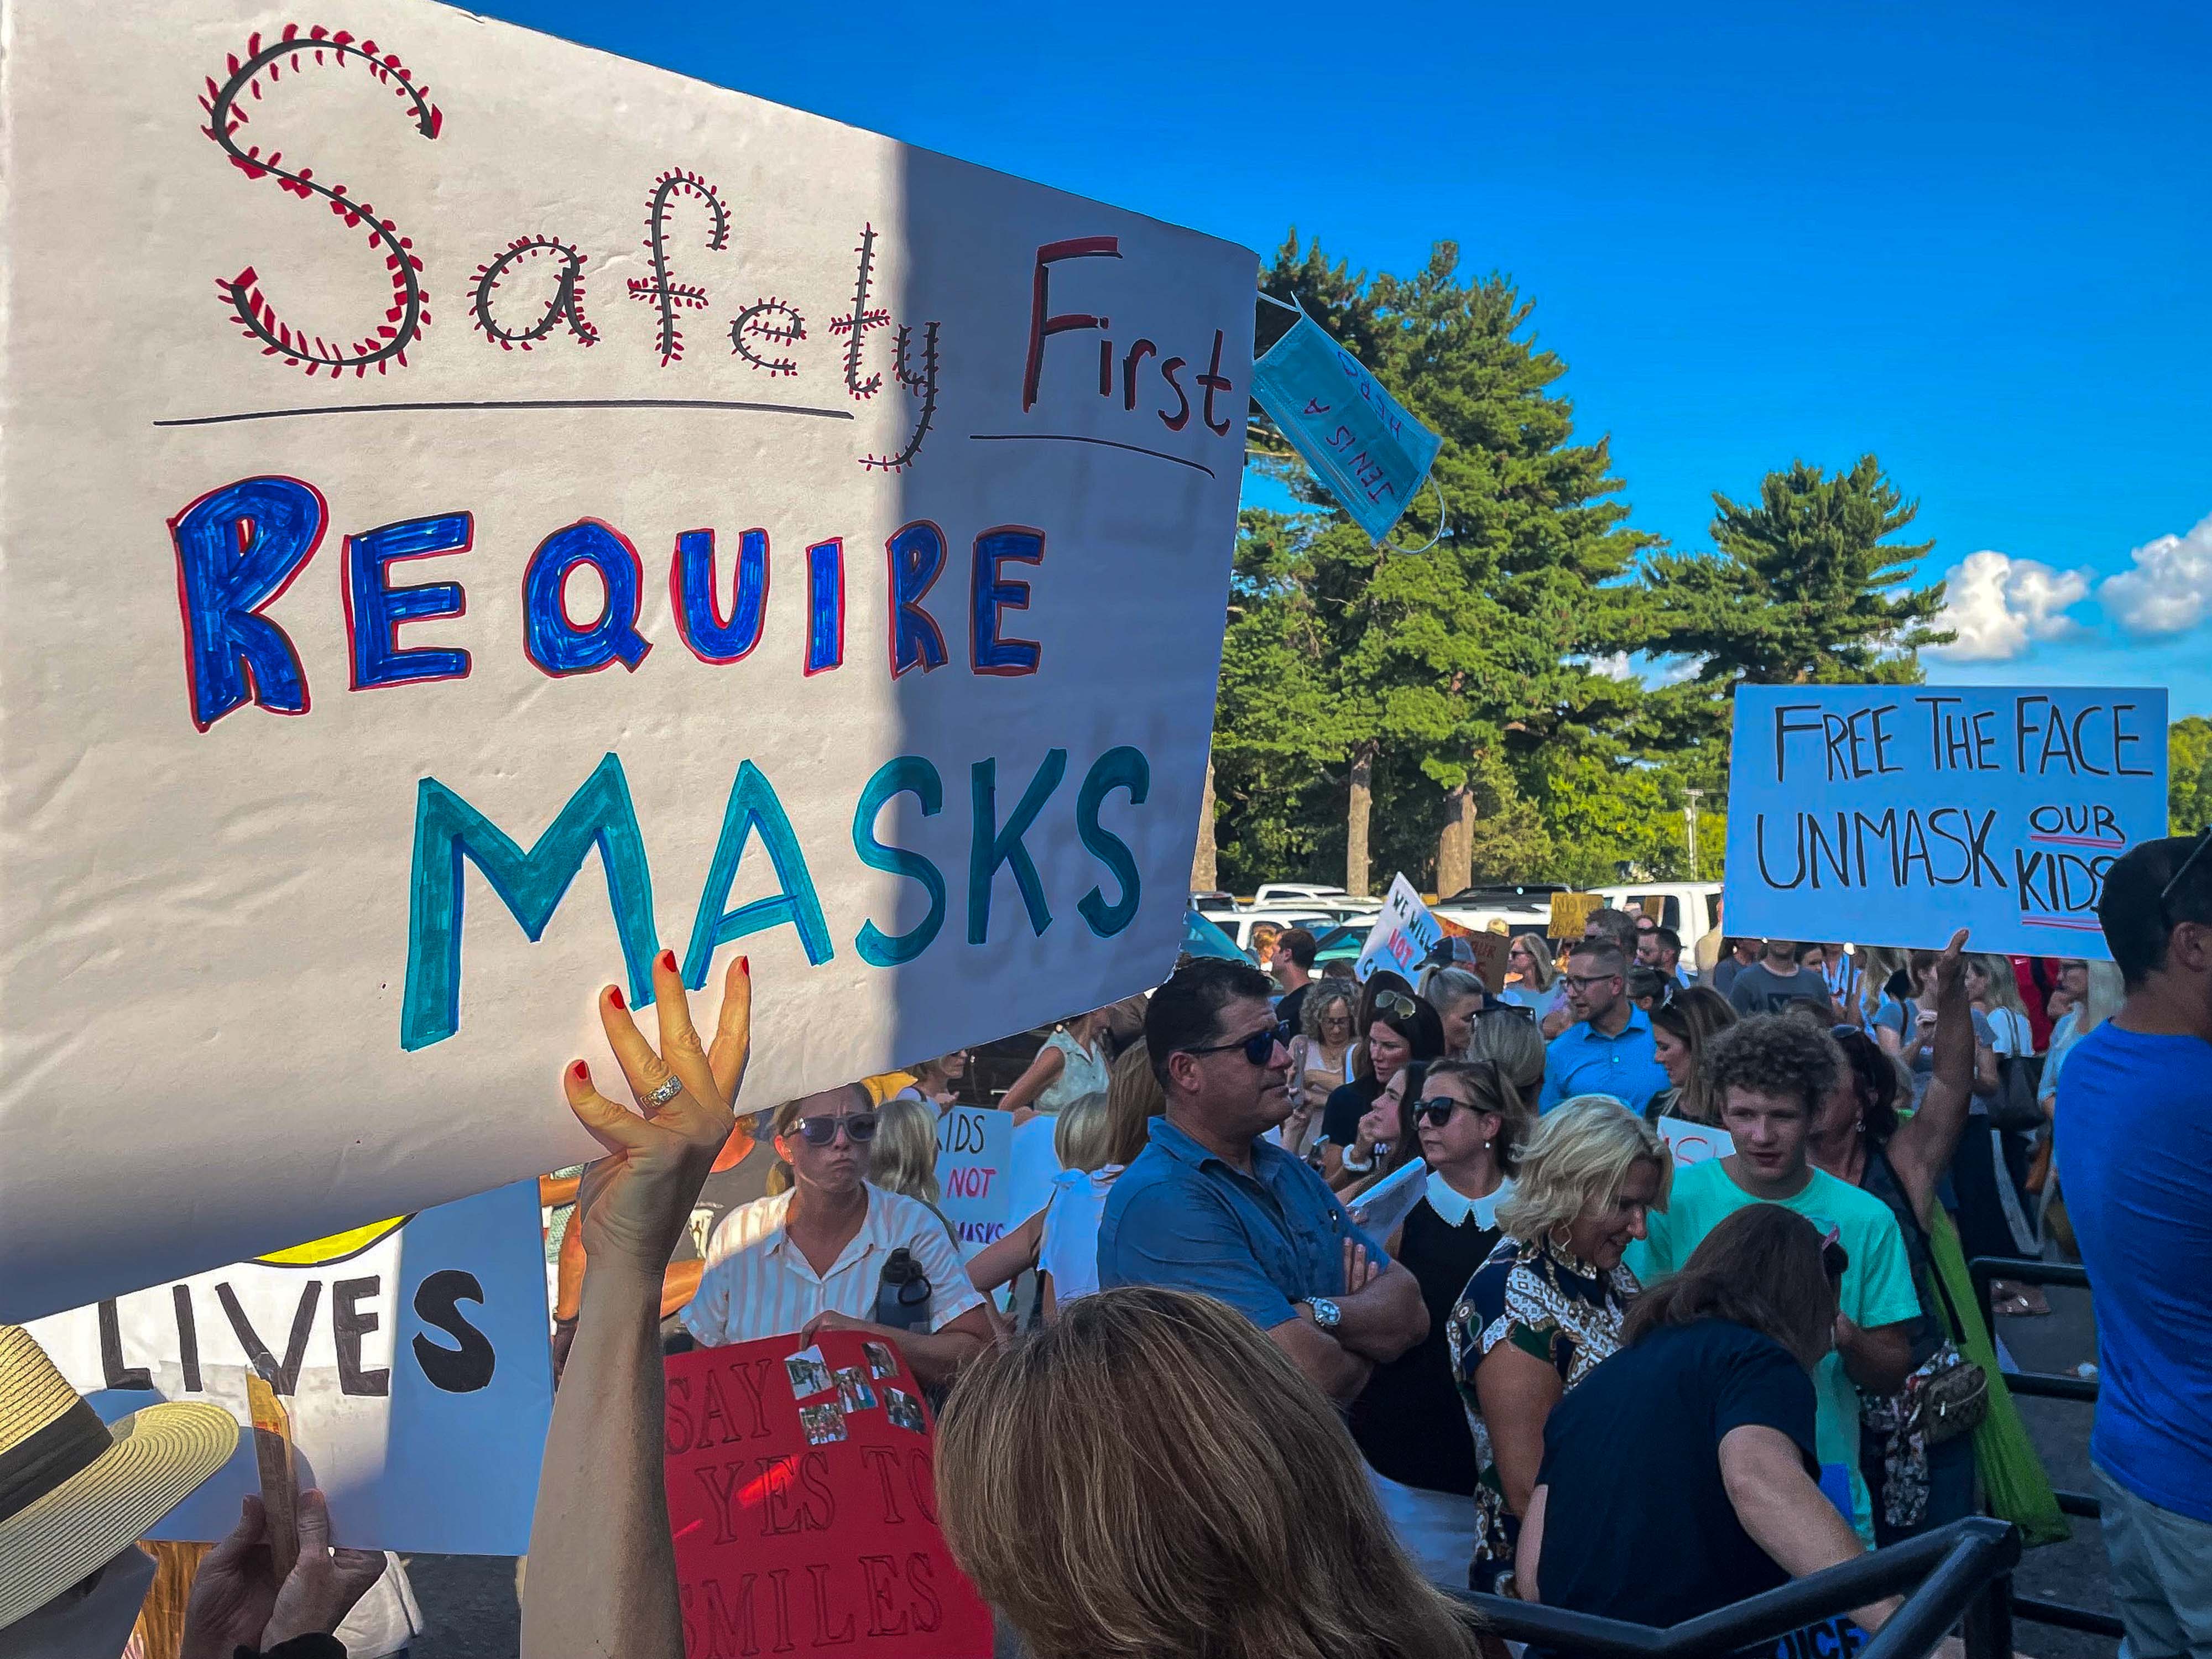 A crowd of people hold up signs for and against school mask mandates during a daytime protest.